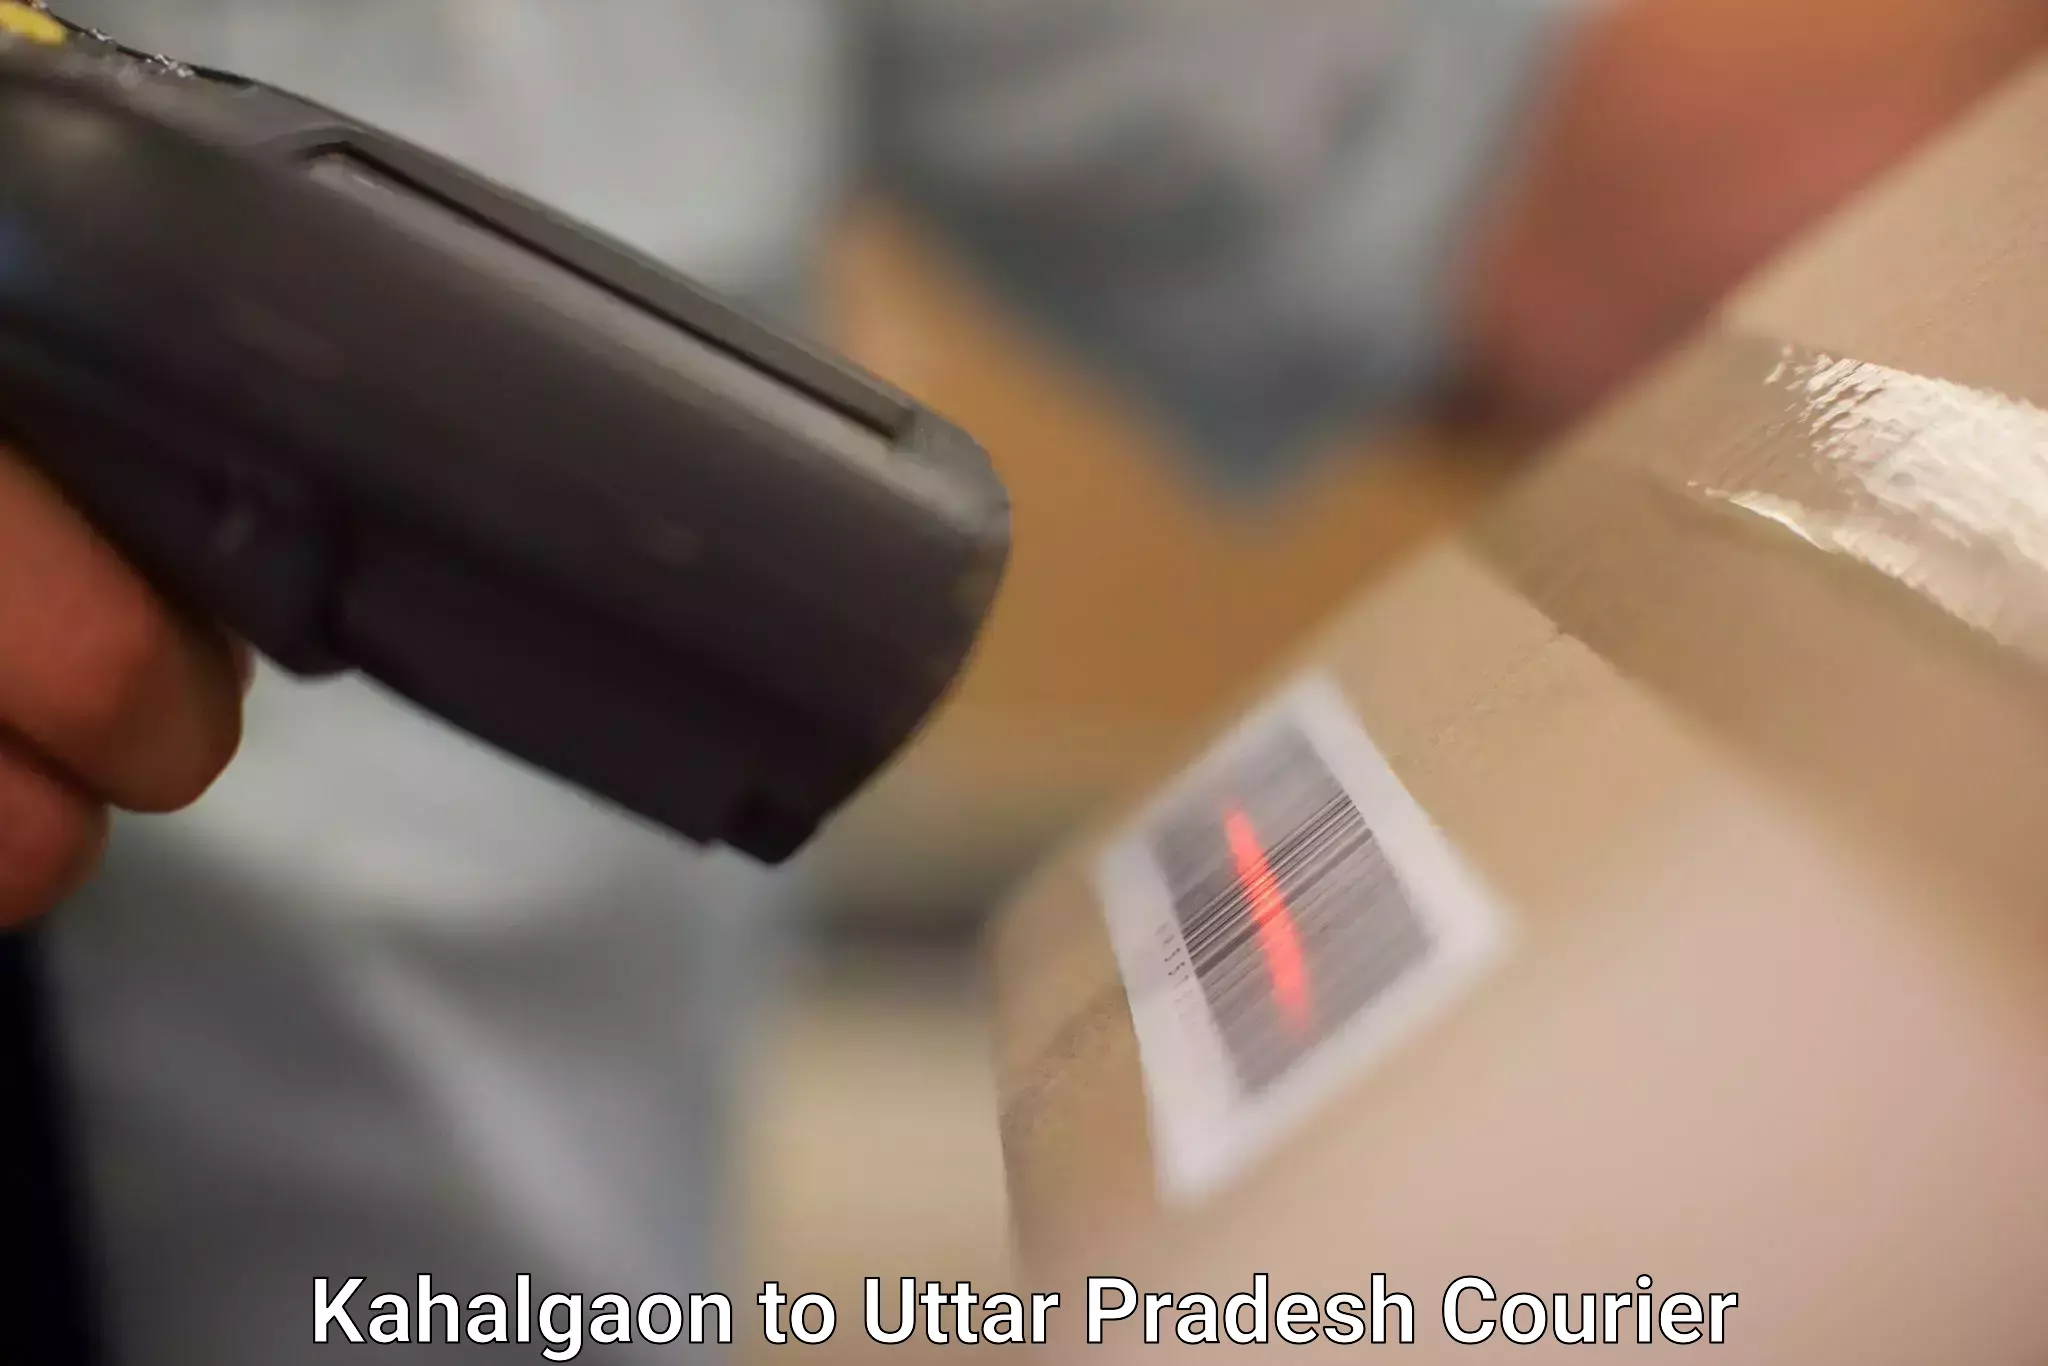 Expedited shipping methods Kahalgaon to Lucknow